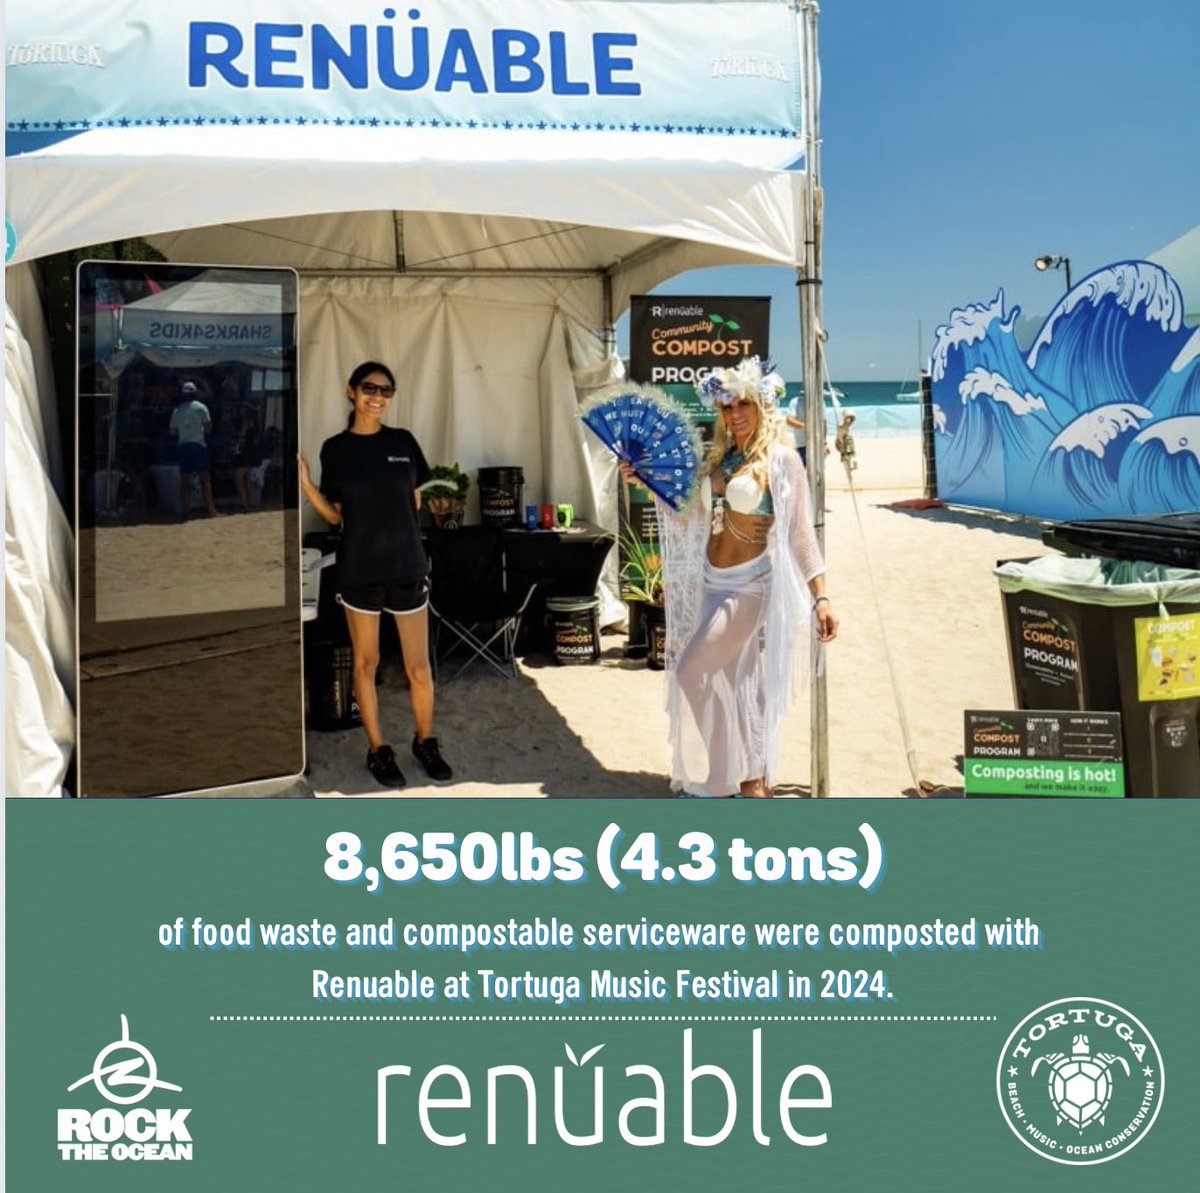 🌍 Happy International Compost Awareness Week! 🌿♻️ Rock The Ocean's Tortuga Music Festival composted a whopping 8,650lbs of food waste & compostable service ware with Renuable in 2024! That's 4.3 tons of waste diverted from the landfill that will be turned back into soil. 🍃